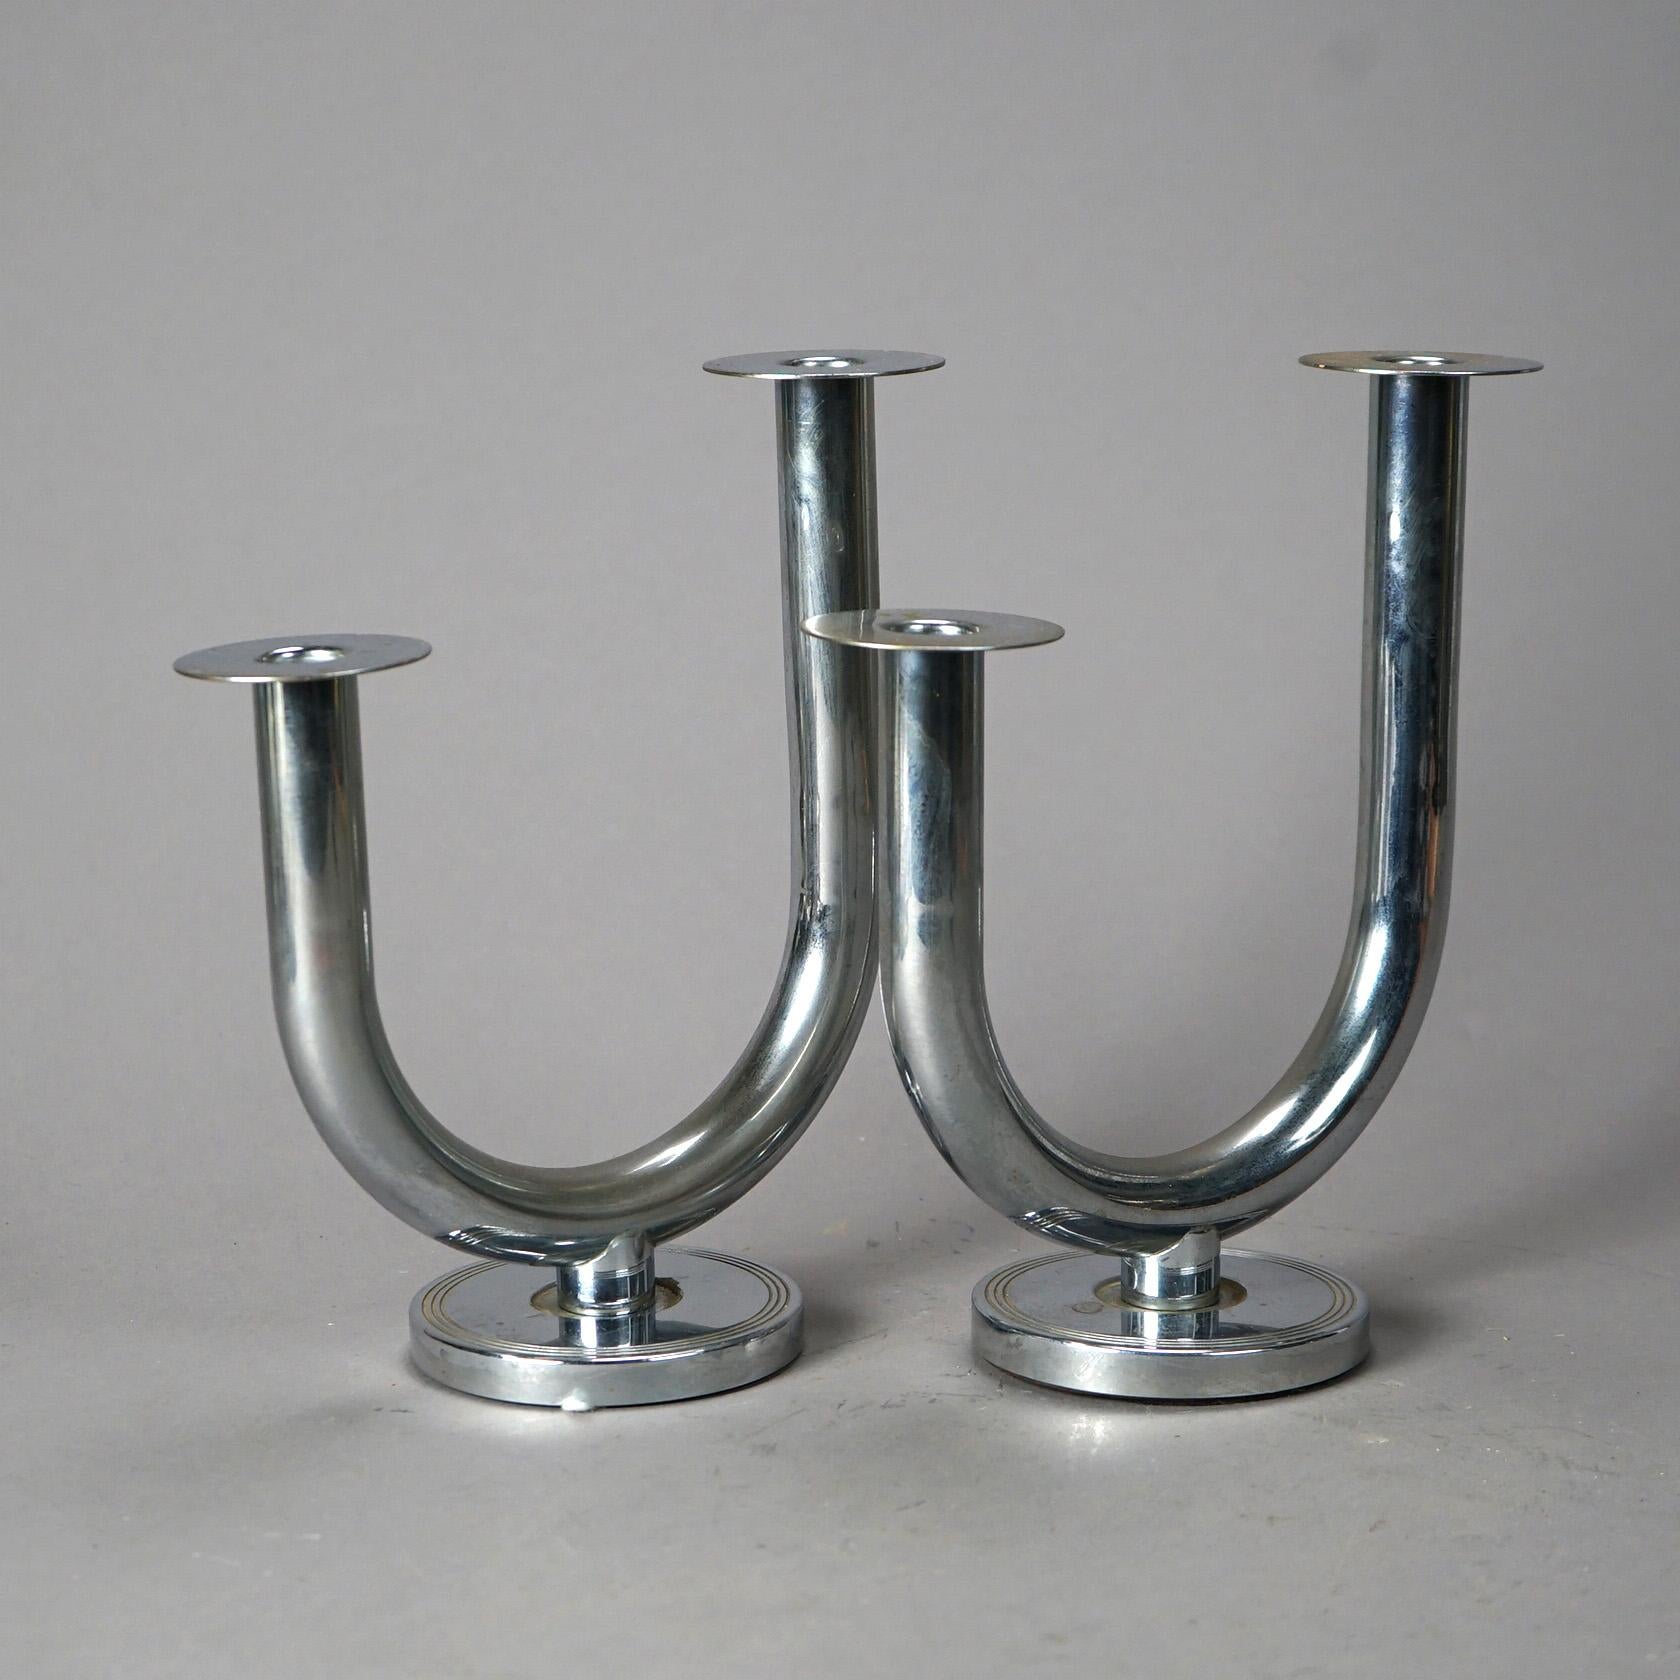 An antique pair of Art Deco double candlesticks offer chrome construction in stylized u-form, c1930

Measures - 10